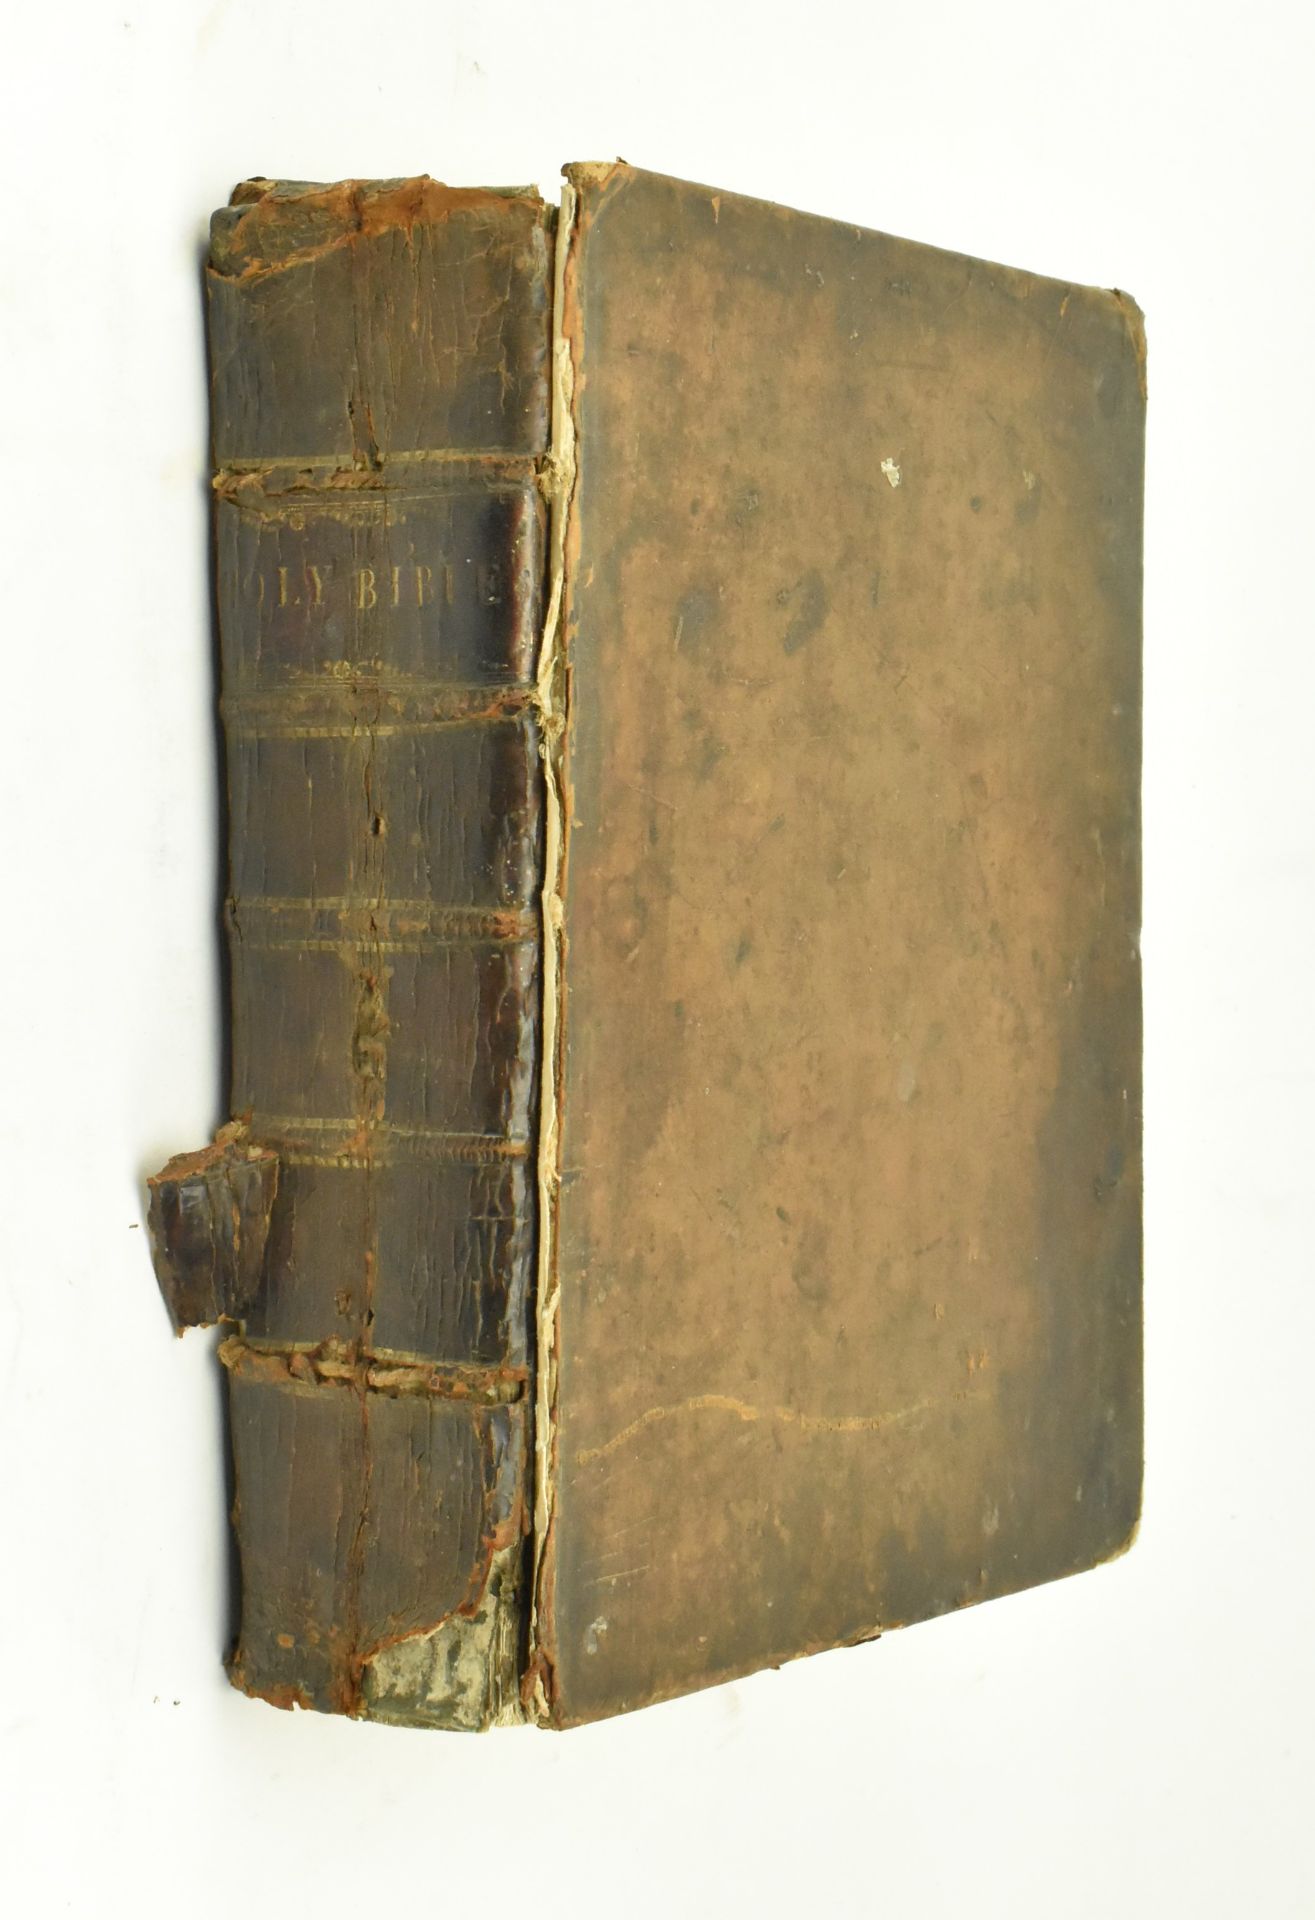 1804 THE HOLY BIBLE, OR, DIVINE TREASURY. PRINTED KIDDERMINSTER